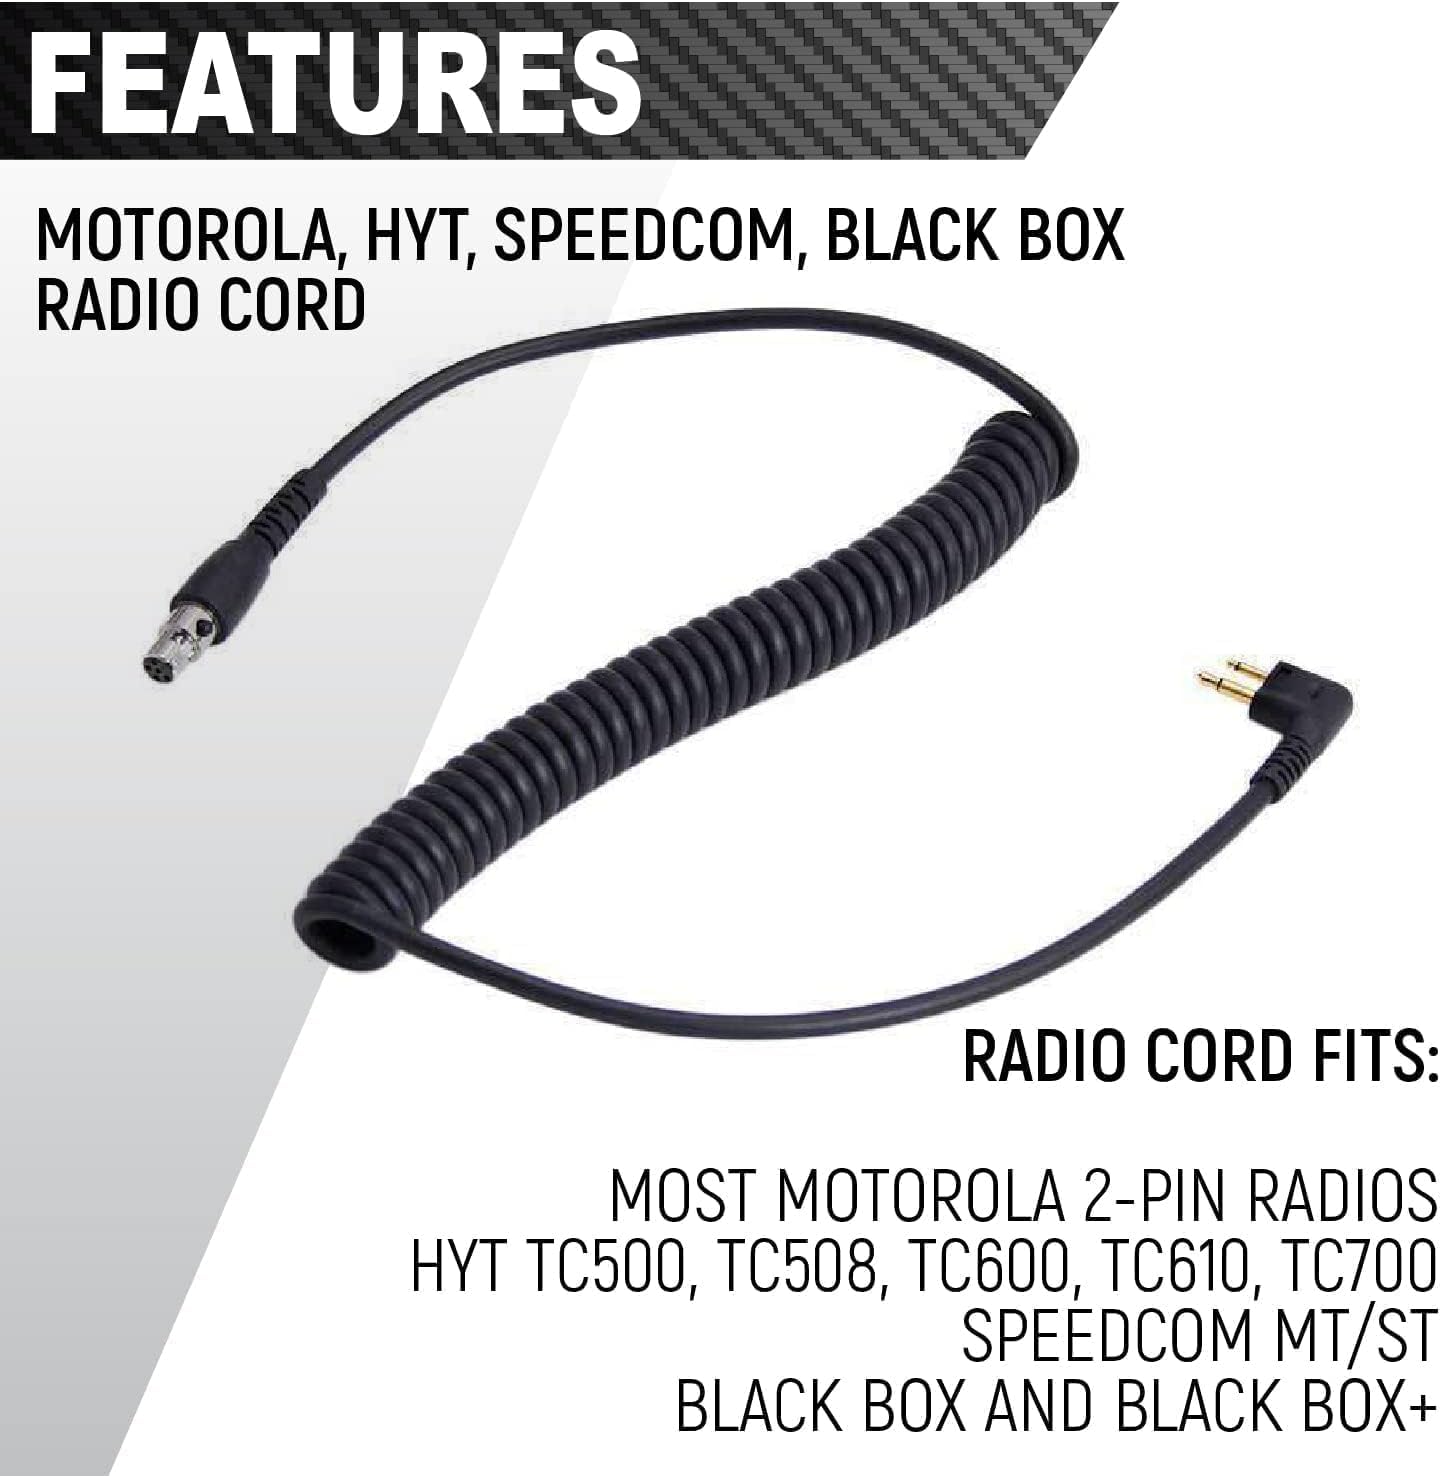 Rugged Behind The Head Headset and Adaptor Cable for Racing Radios Electronics Motorola CP200 – Features Cable to Connect to Two Way Handheld Radio Noise Reduction Volume Control Knob 3.5mm Input Jack